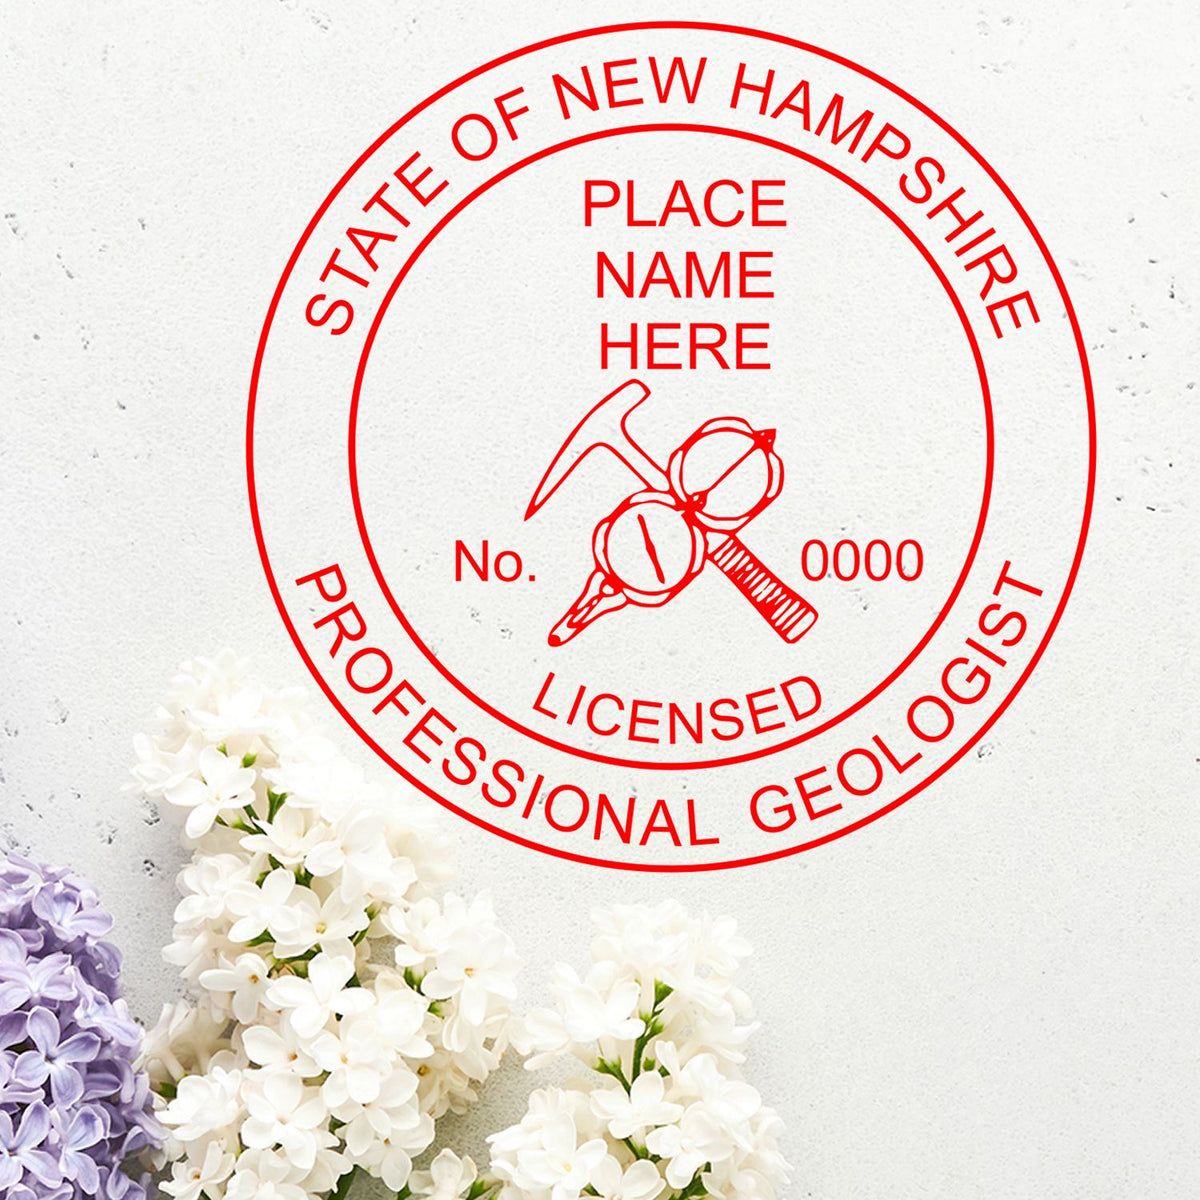 Another Example of a stamped impression of the Self-Inking New Hampshire Geologist Stamp on a office form